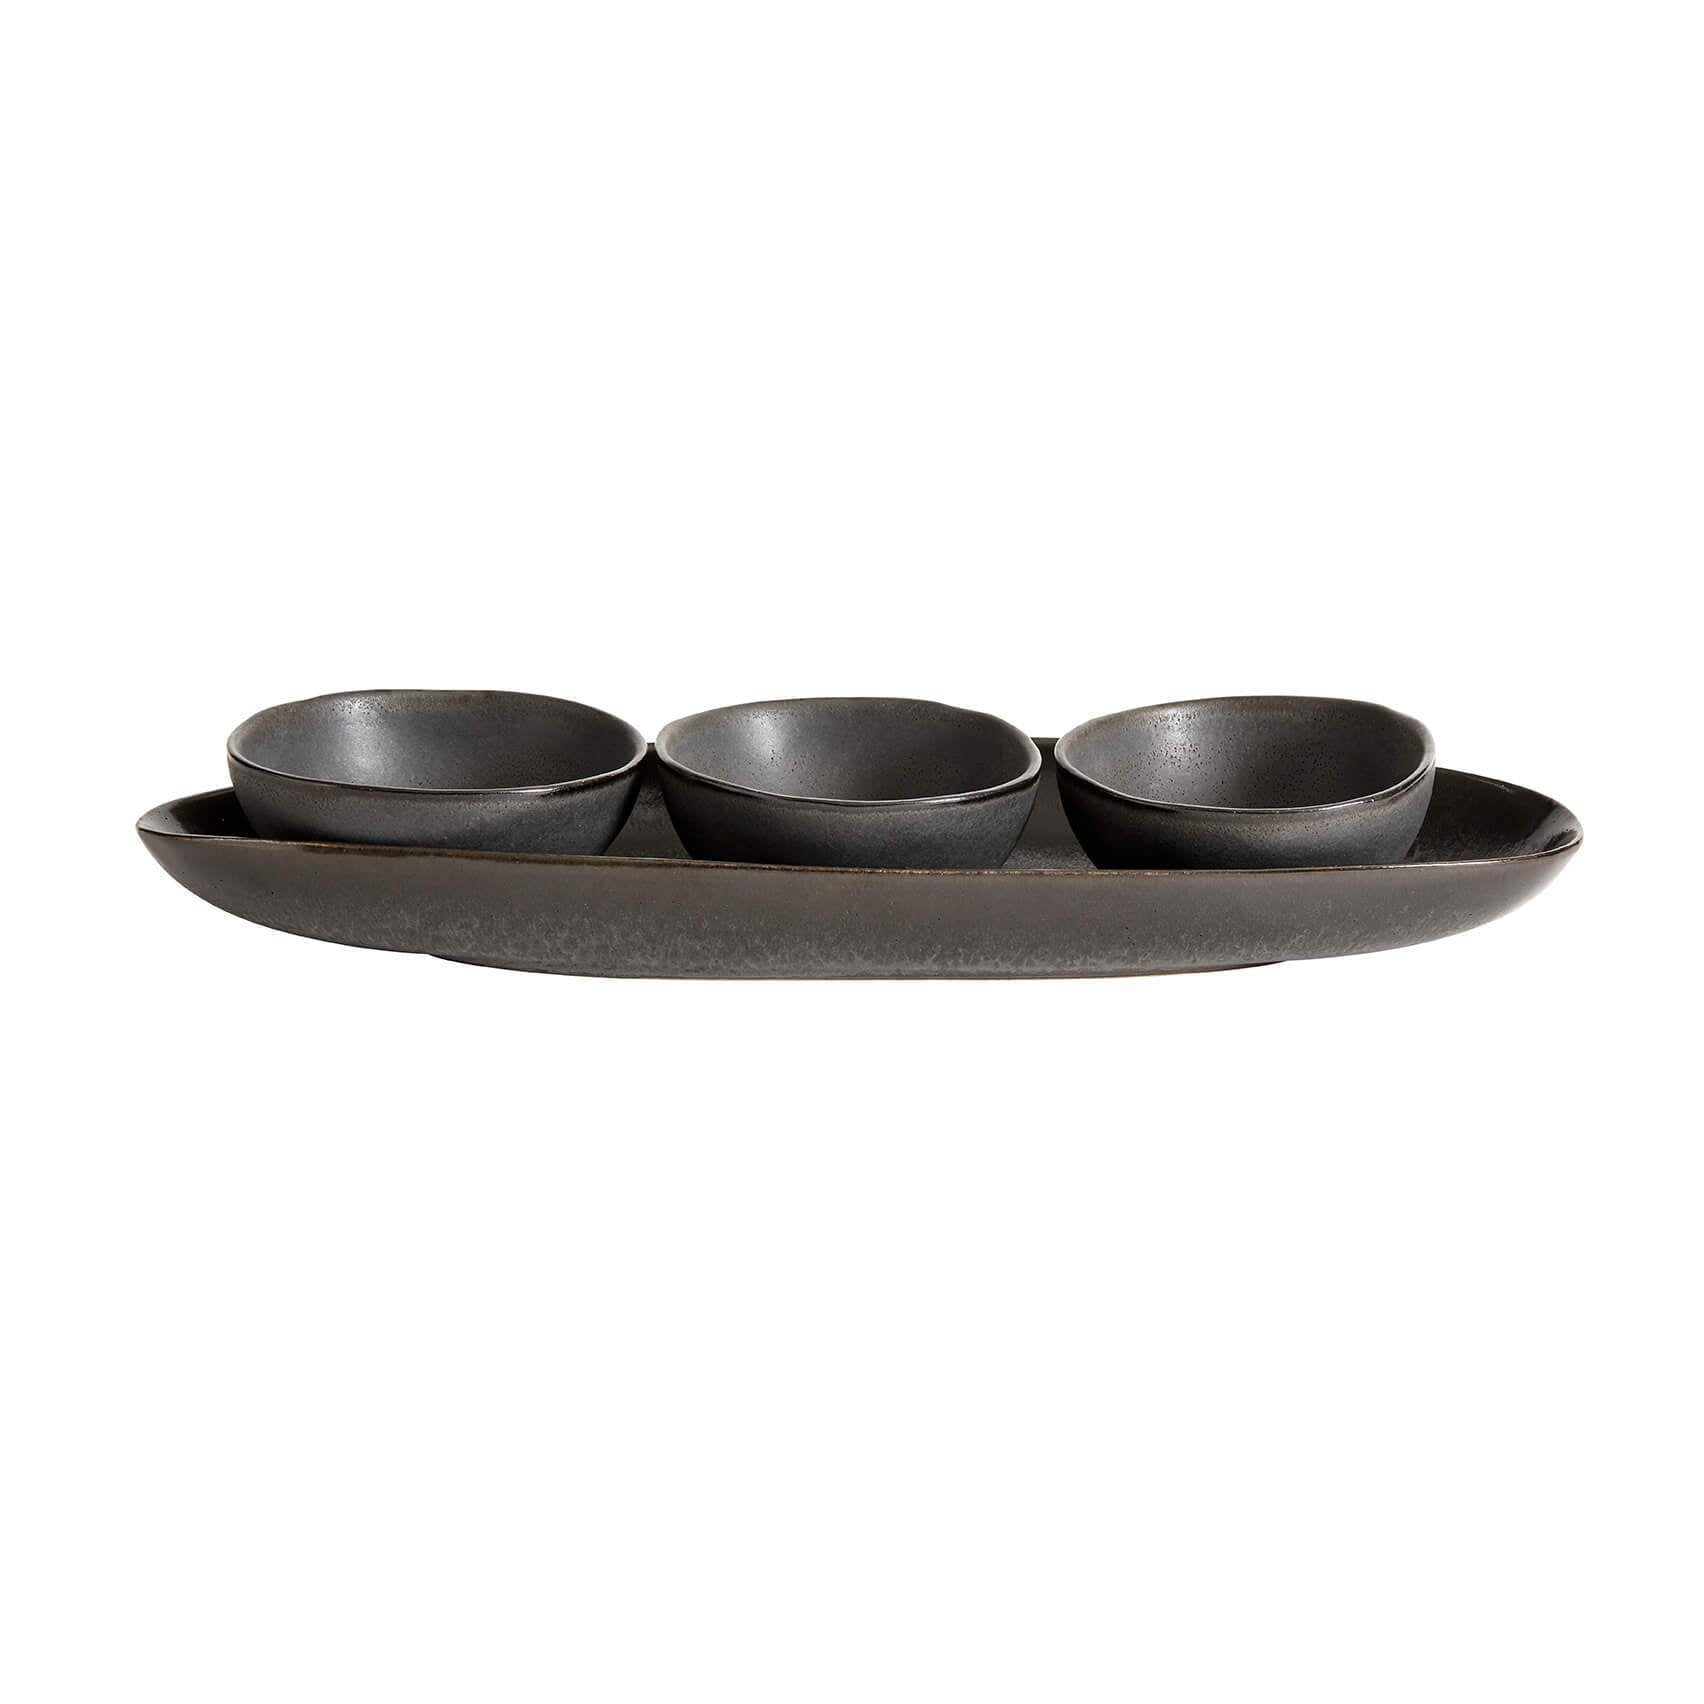 Muubs Mame Plave Oval Coffee, 36,5 cm